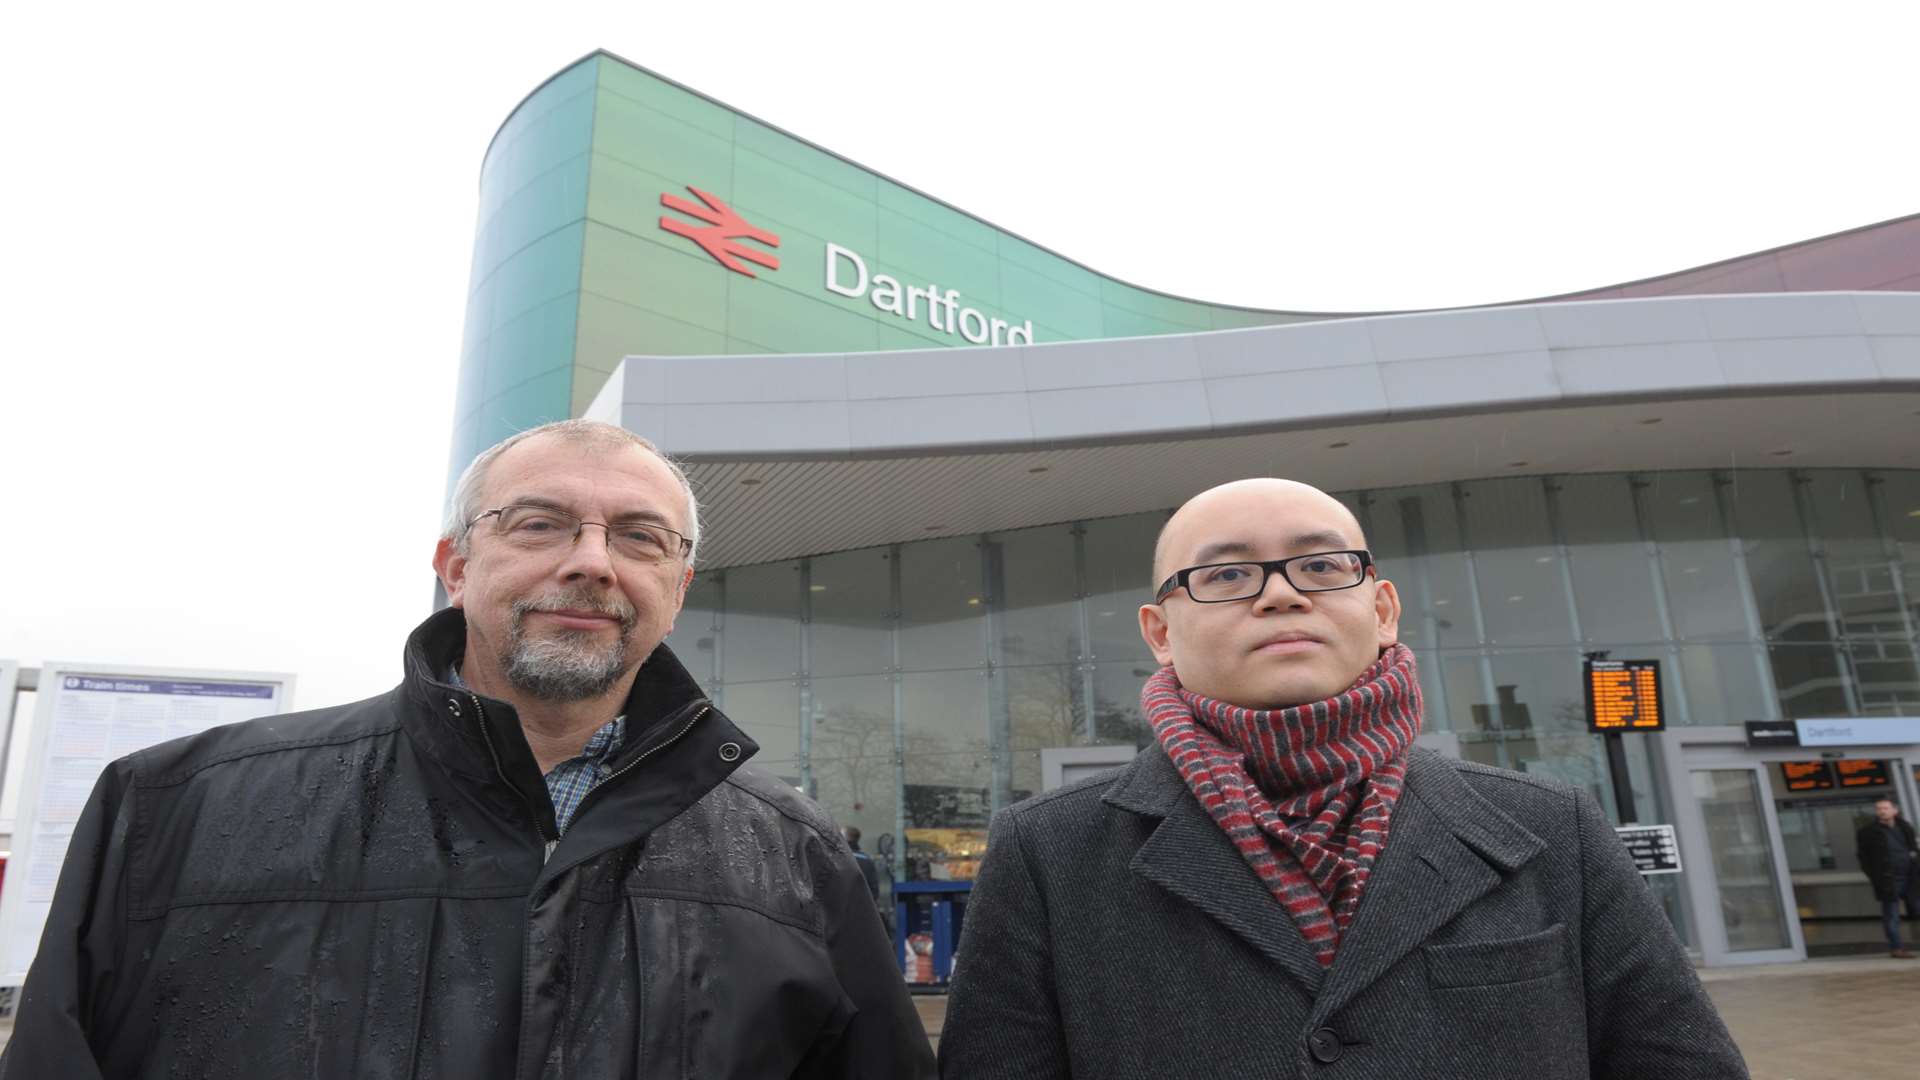 Mike Pellat and Phil Rogers outside Dartford station